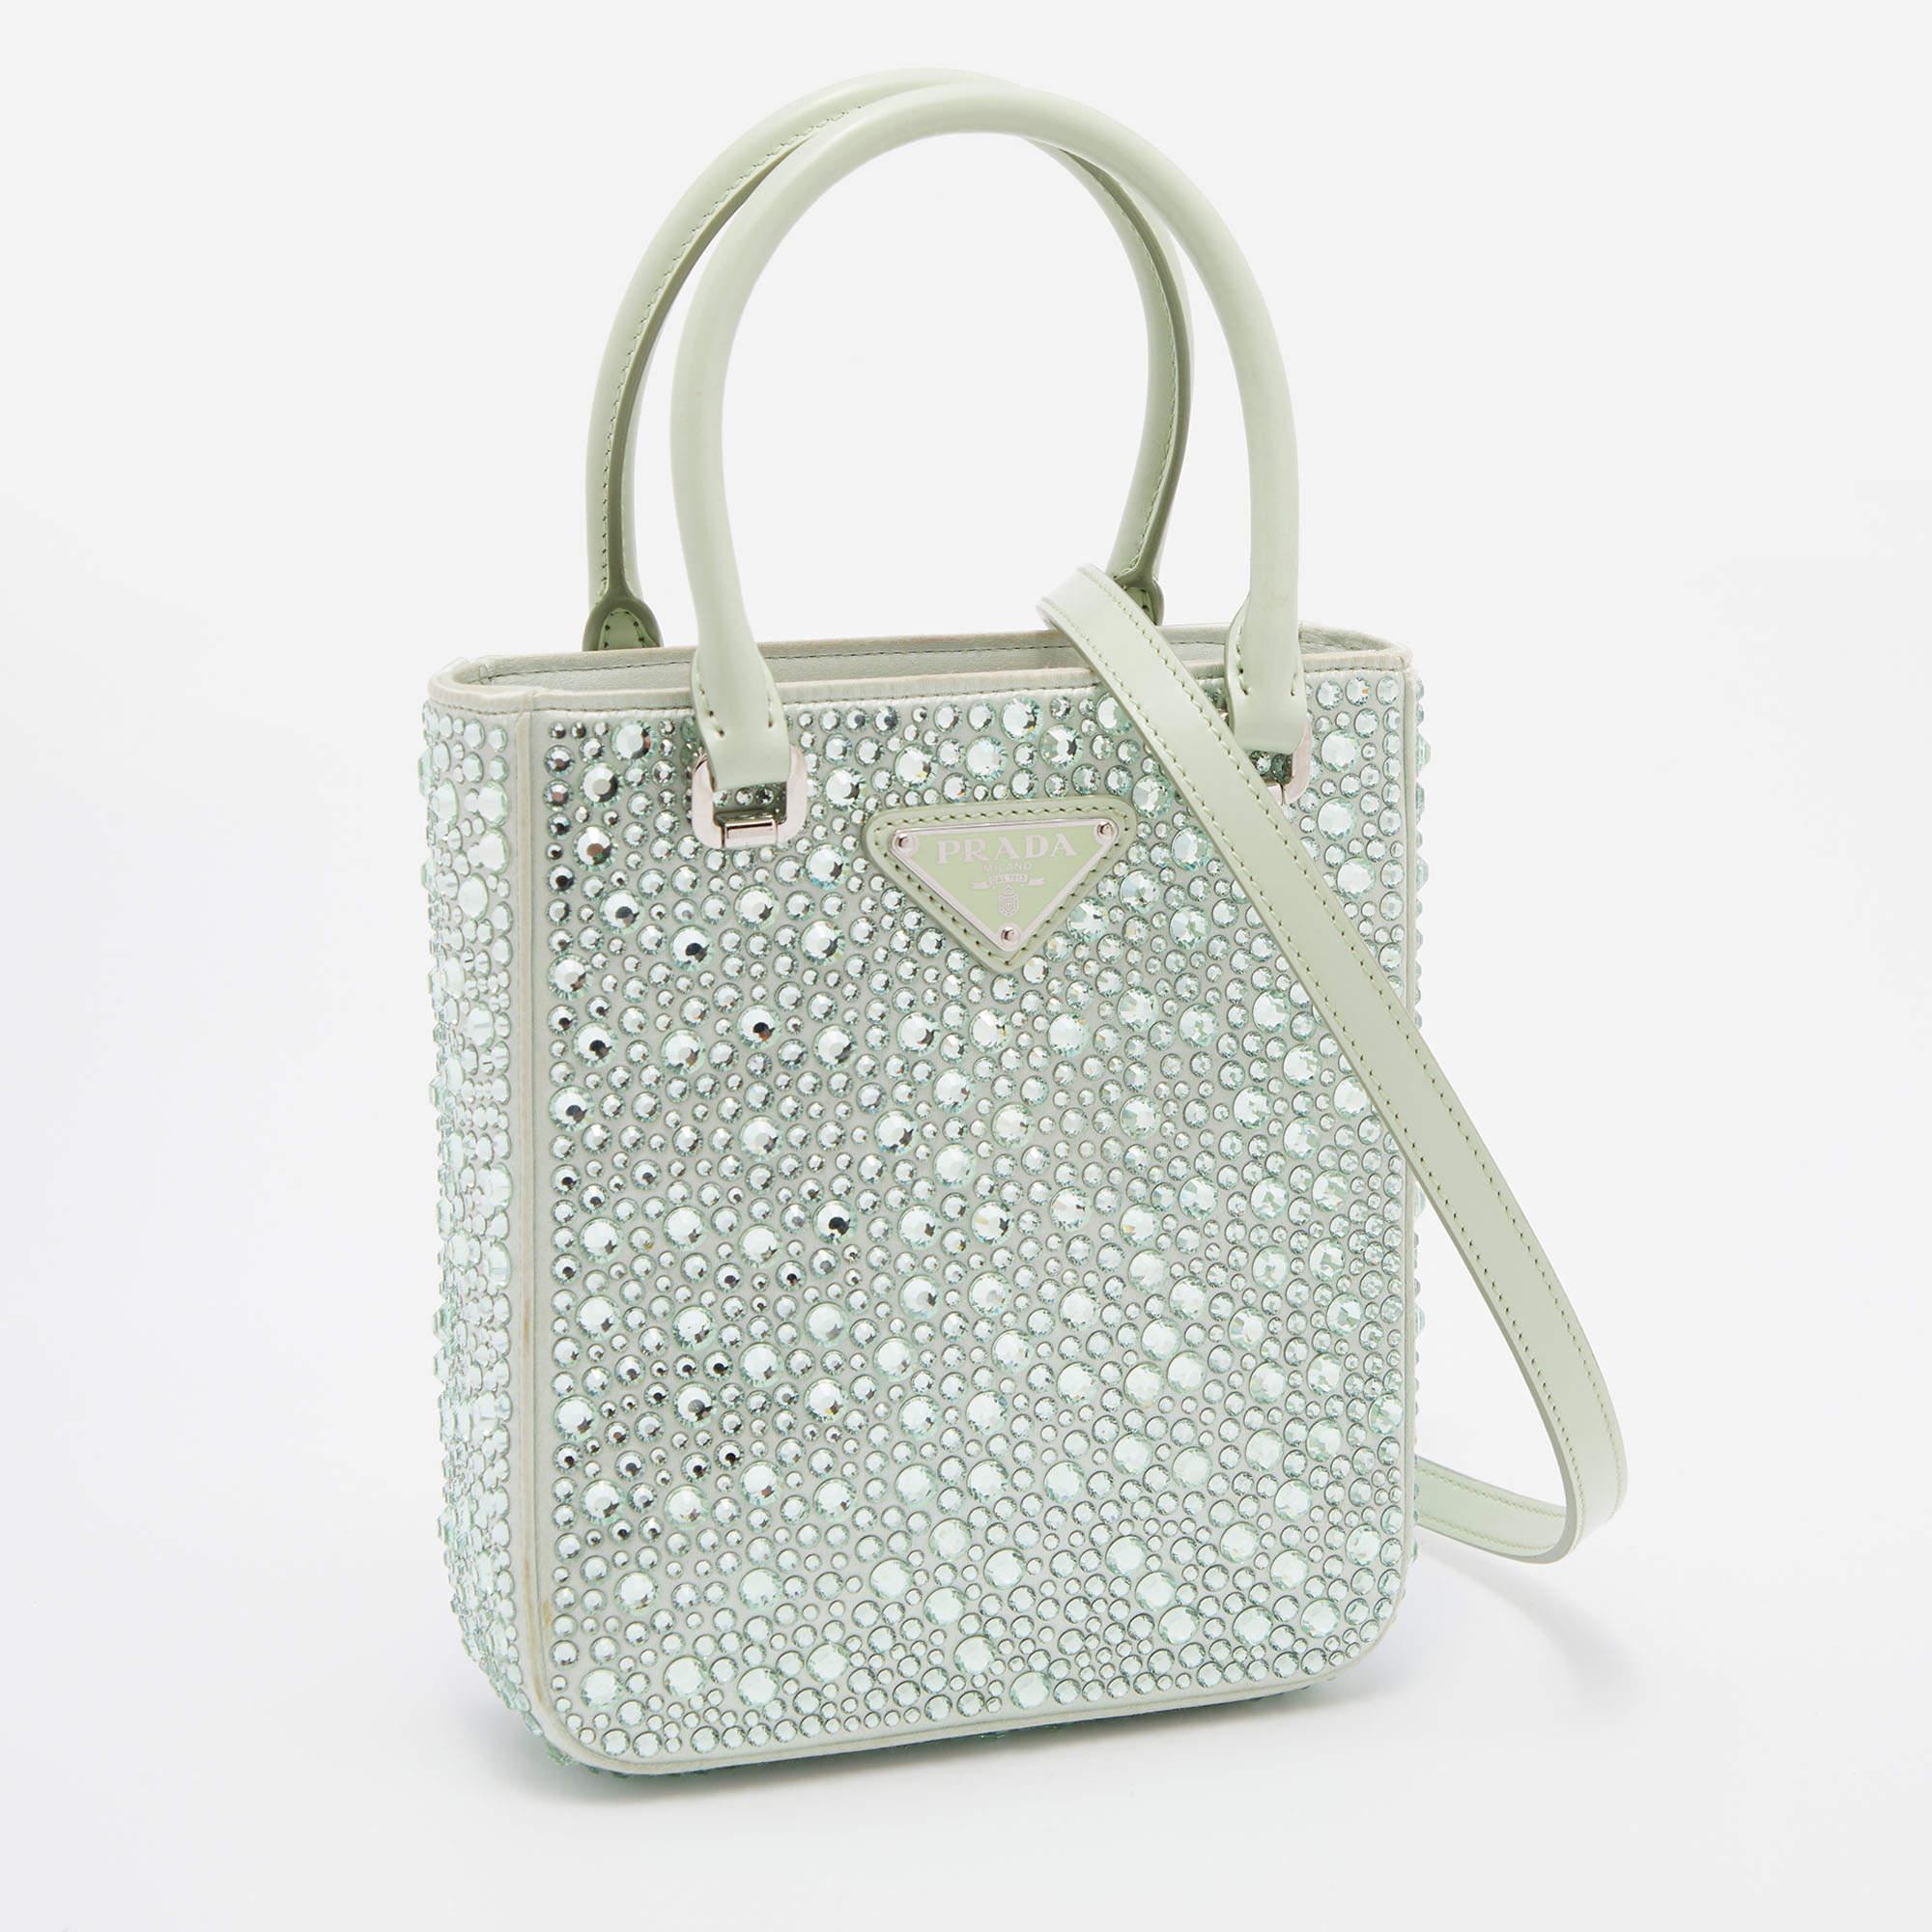 Women's Prada Green Crytal Embellished Satin Small Tote